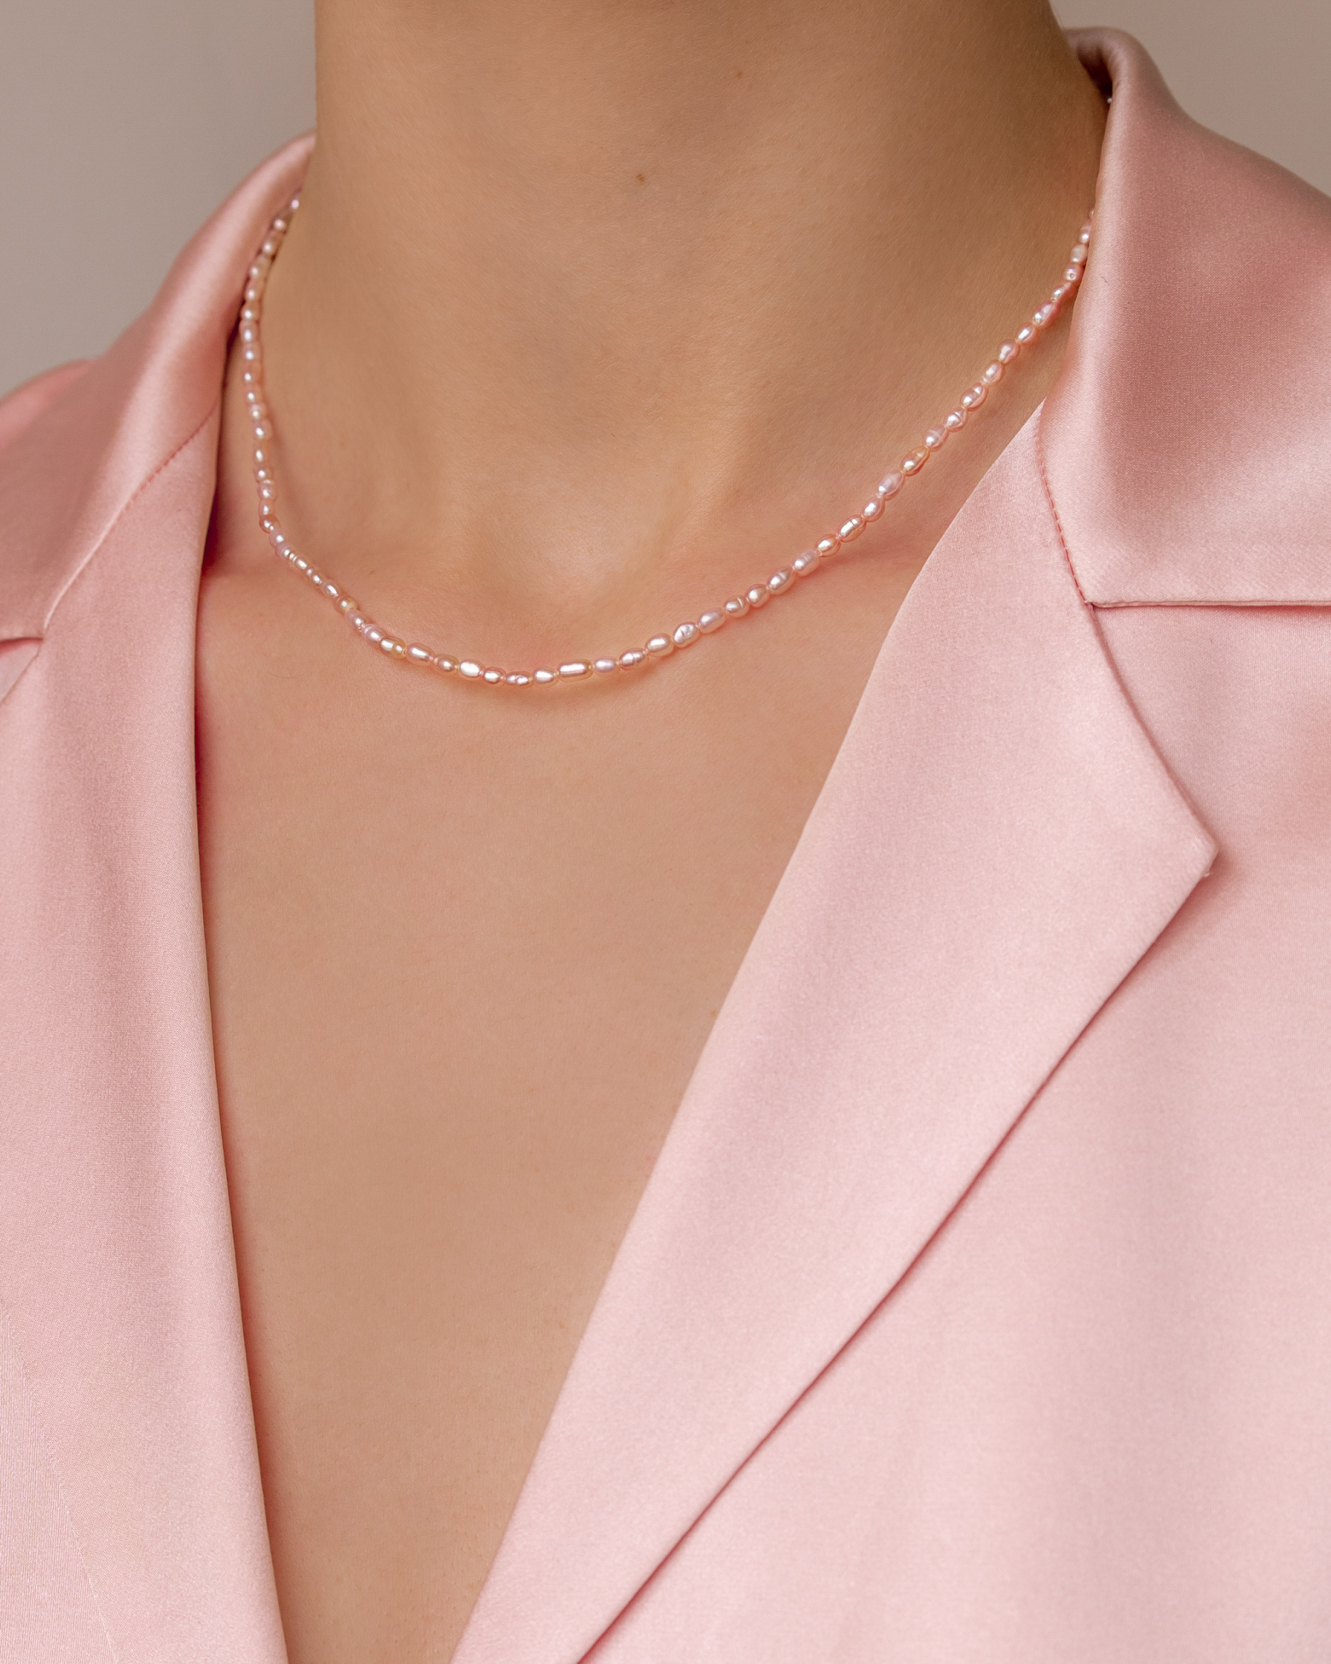 Dream Pink Pearl Necklace